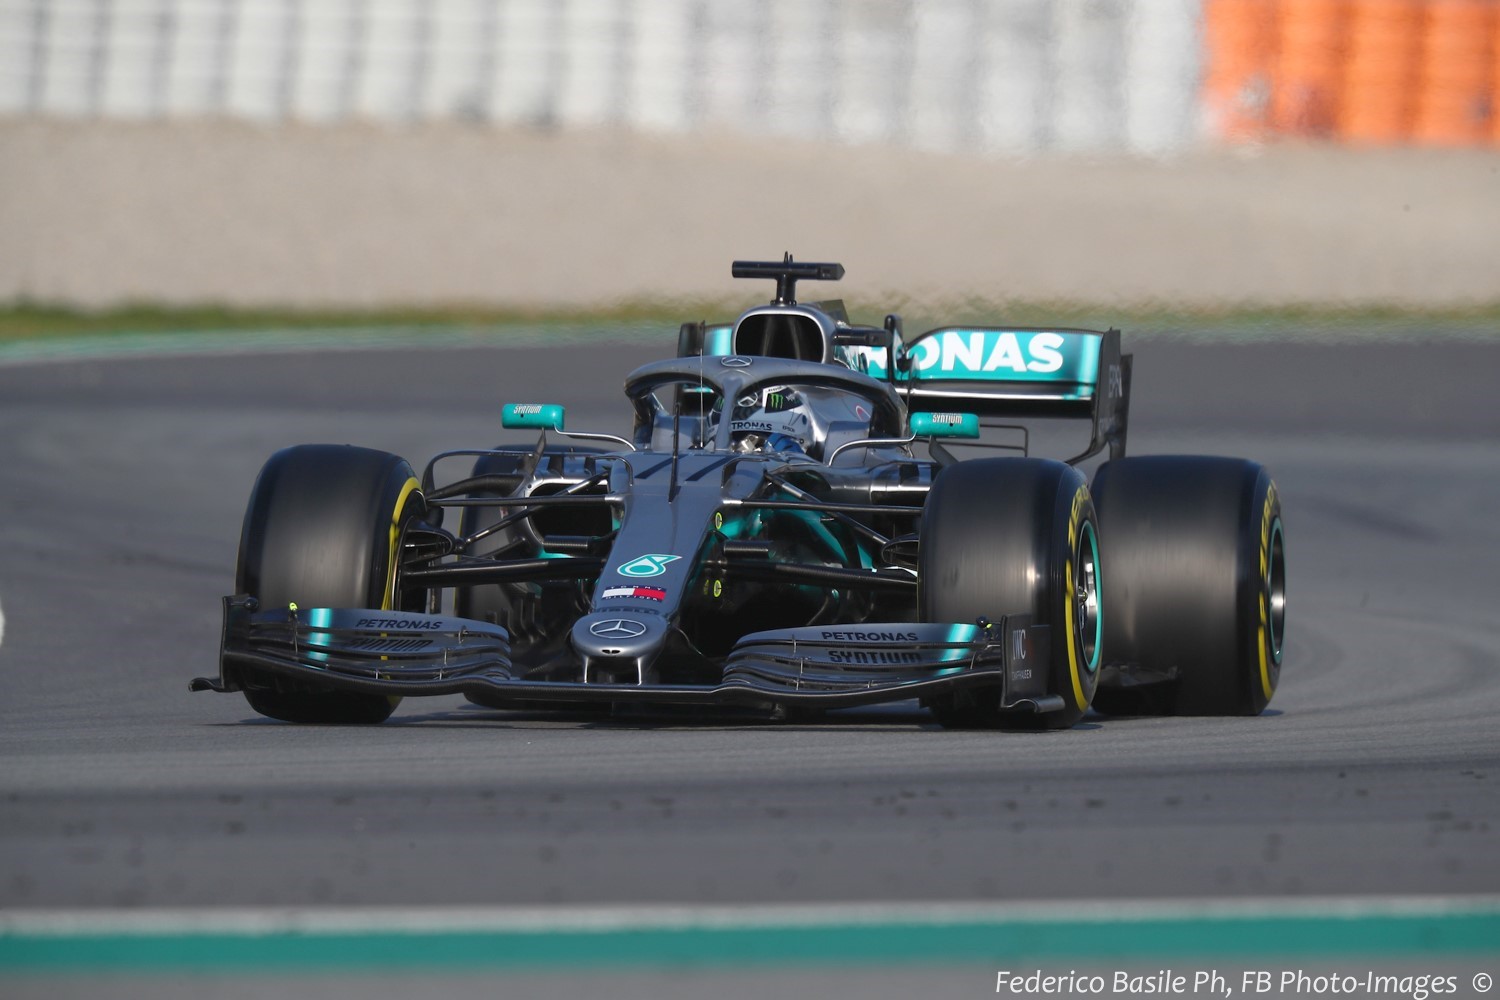 Mercedes was sandbagging in Barcelona - we do not yet know their true pace